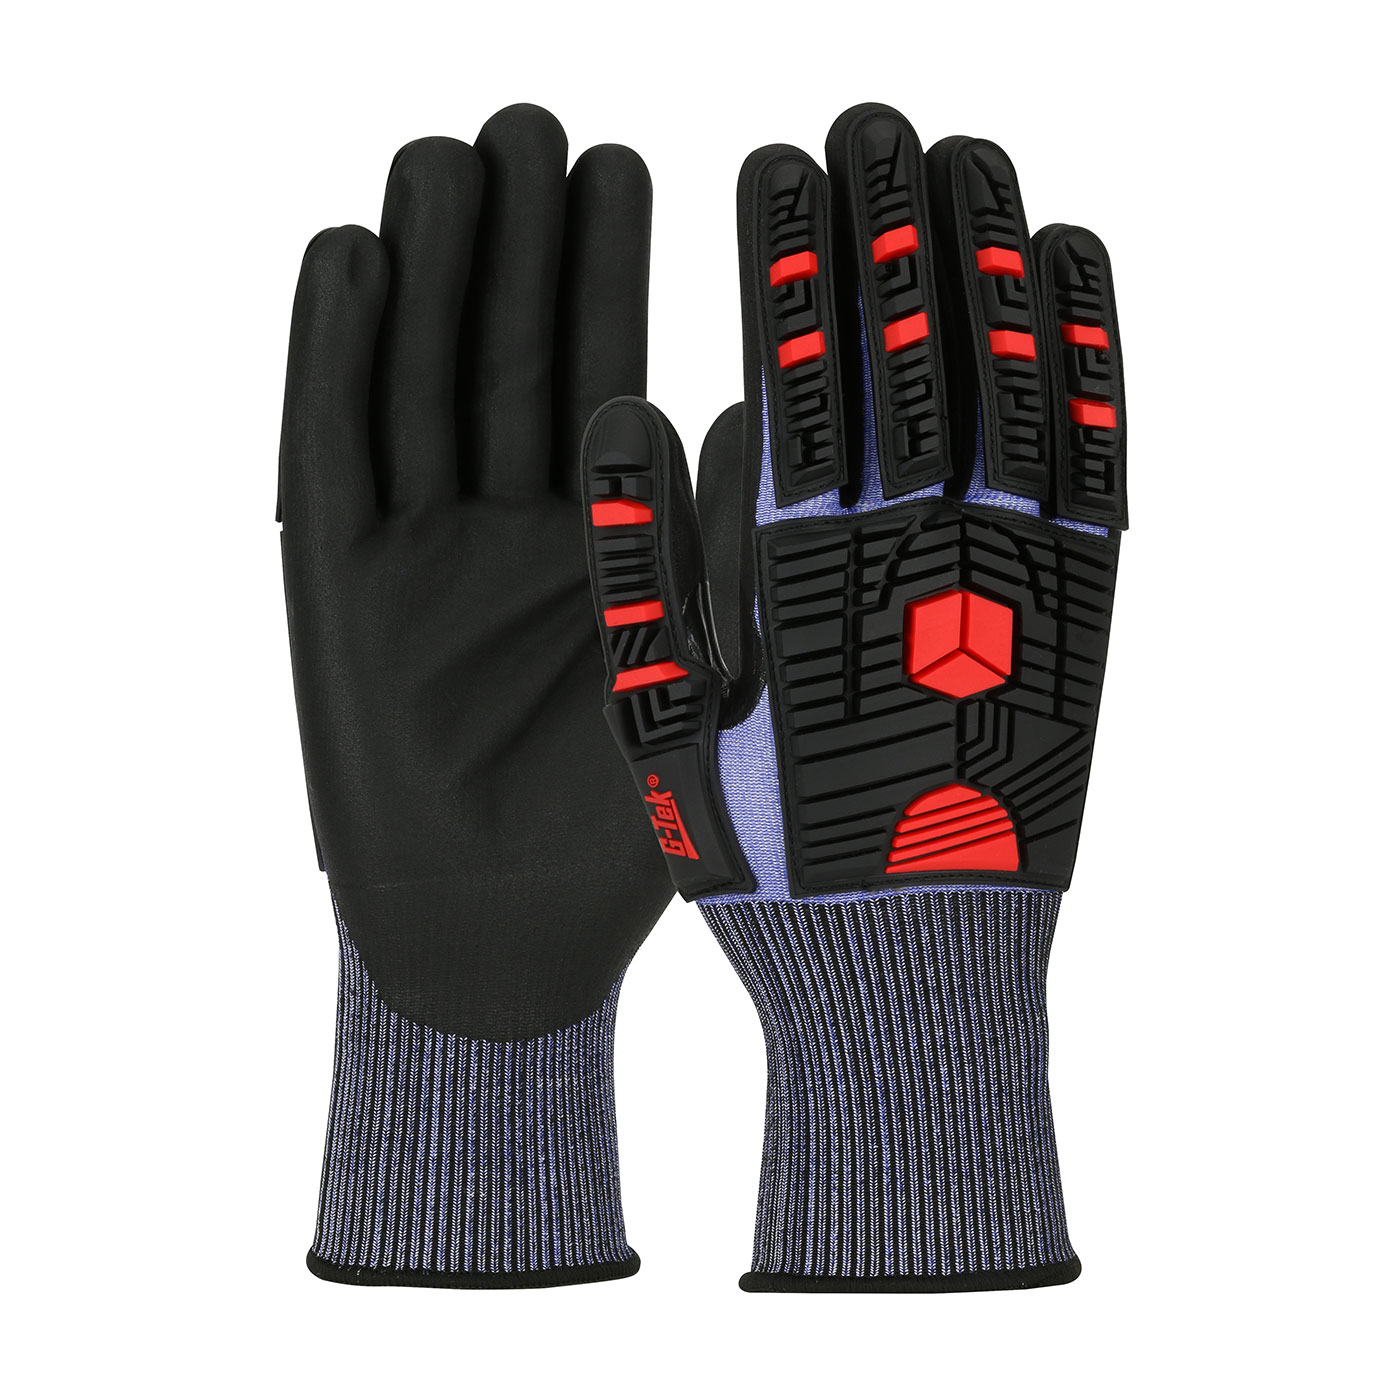 16-MP585 PIP® Seamless Knit G-Tek®  PolyKor® X7™ Blended Glove with Impact Protection and NeoFoam® Coated Palm & Fingers